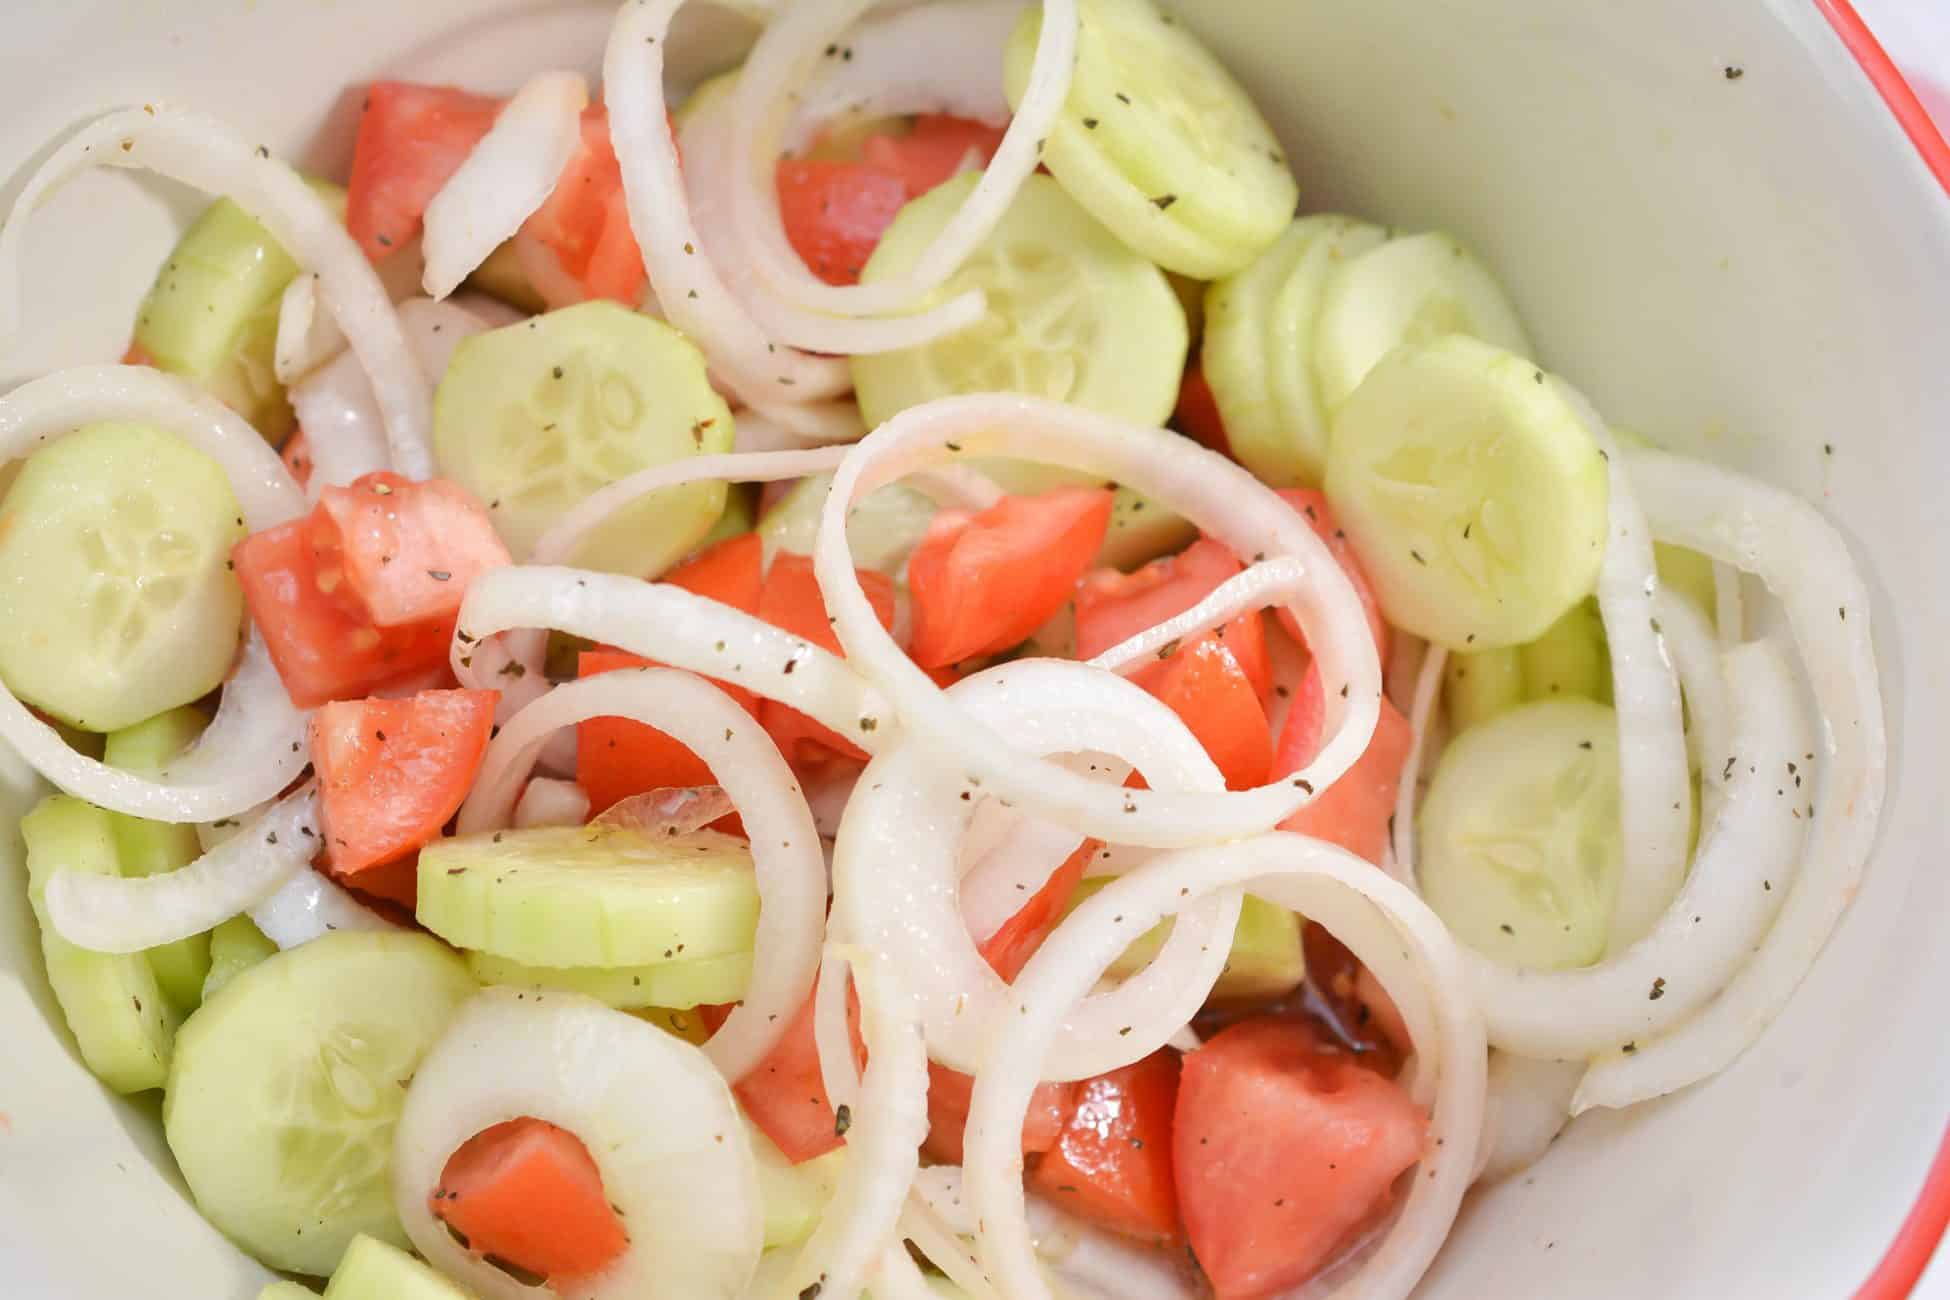 Marinated Cucumbers, Onions and Tomatoes